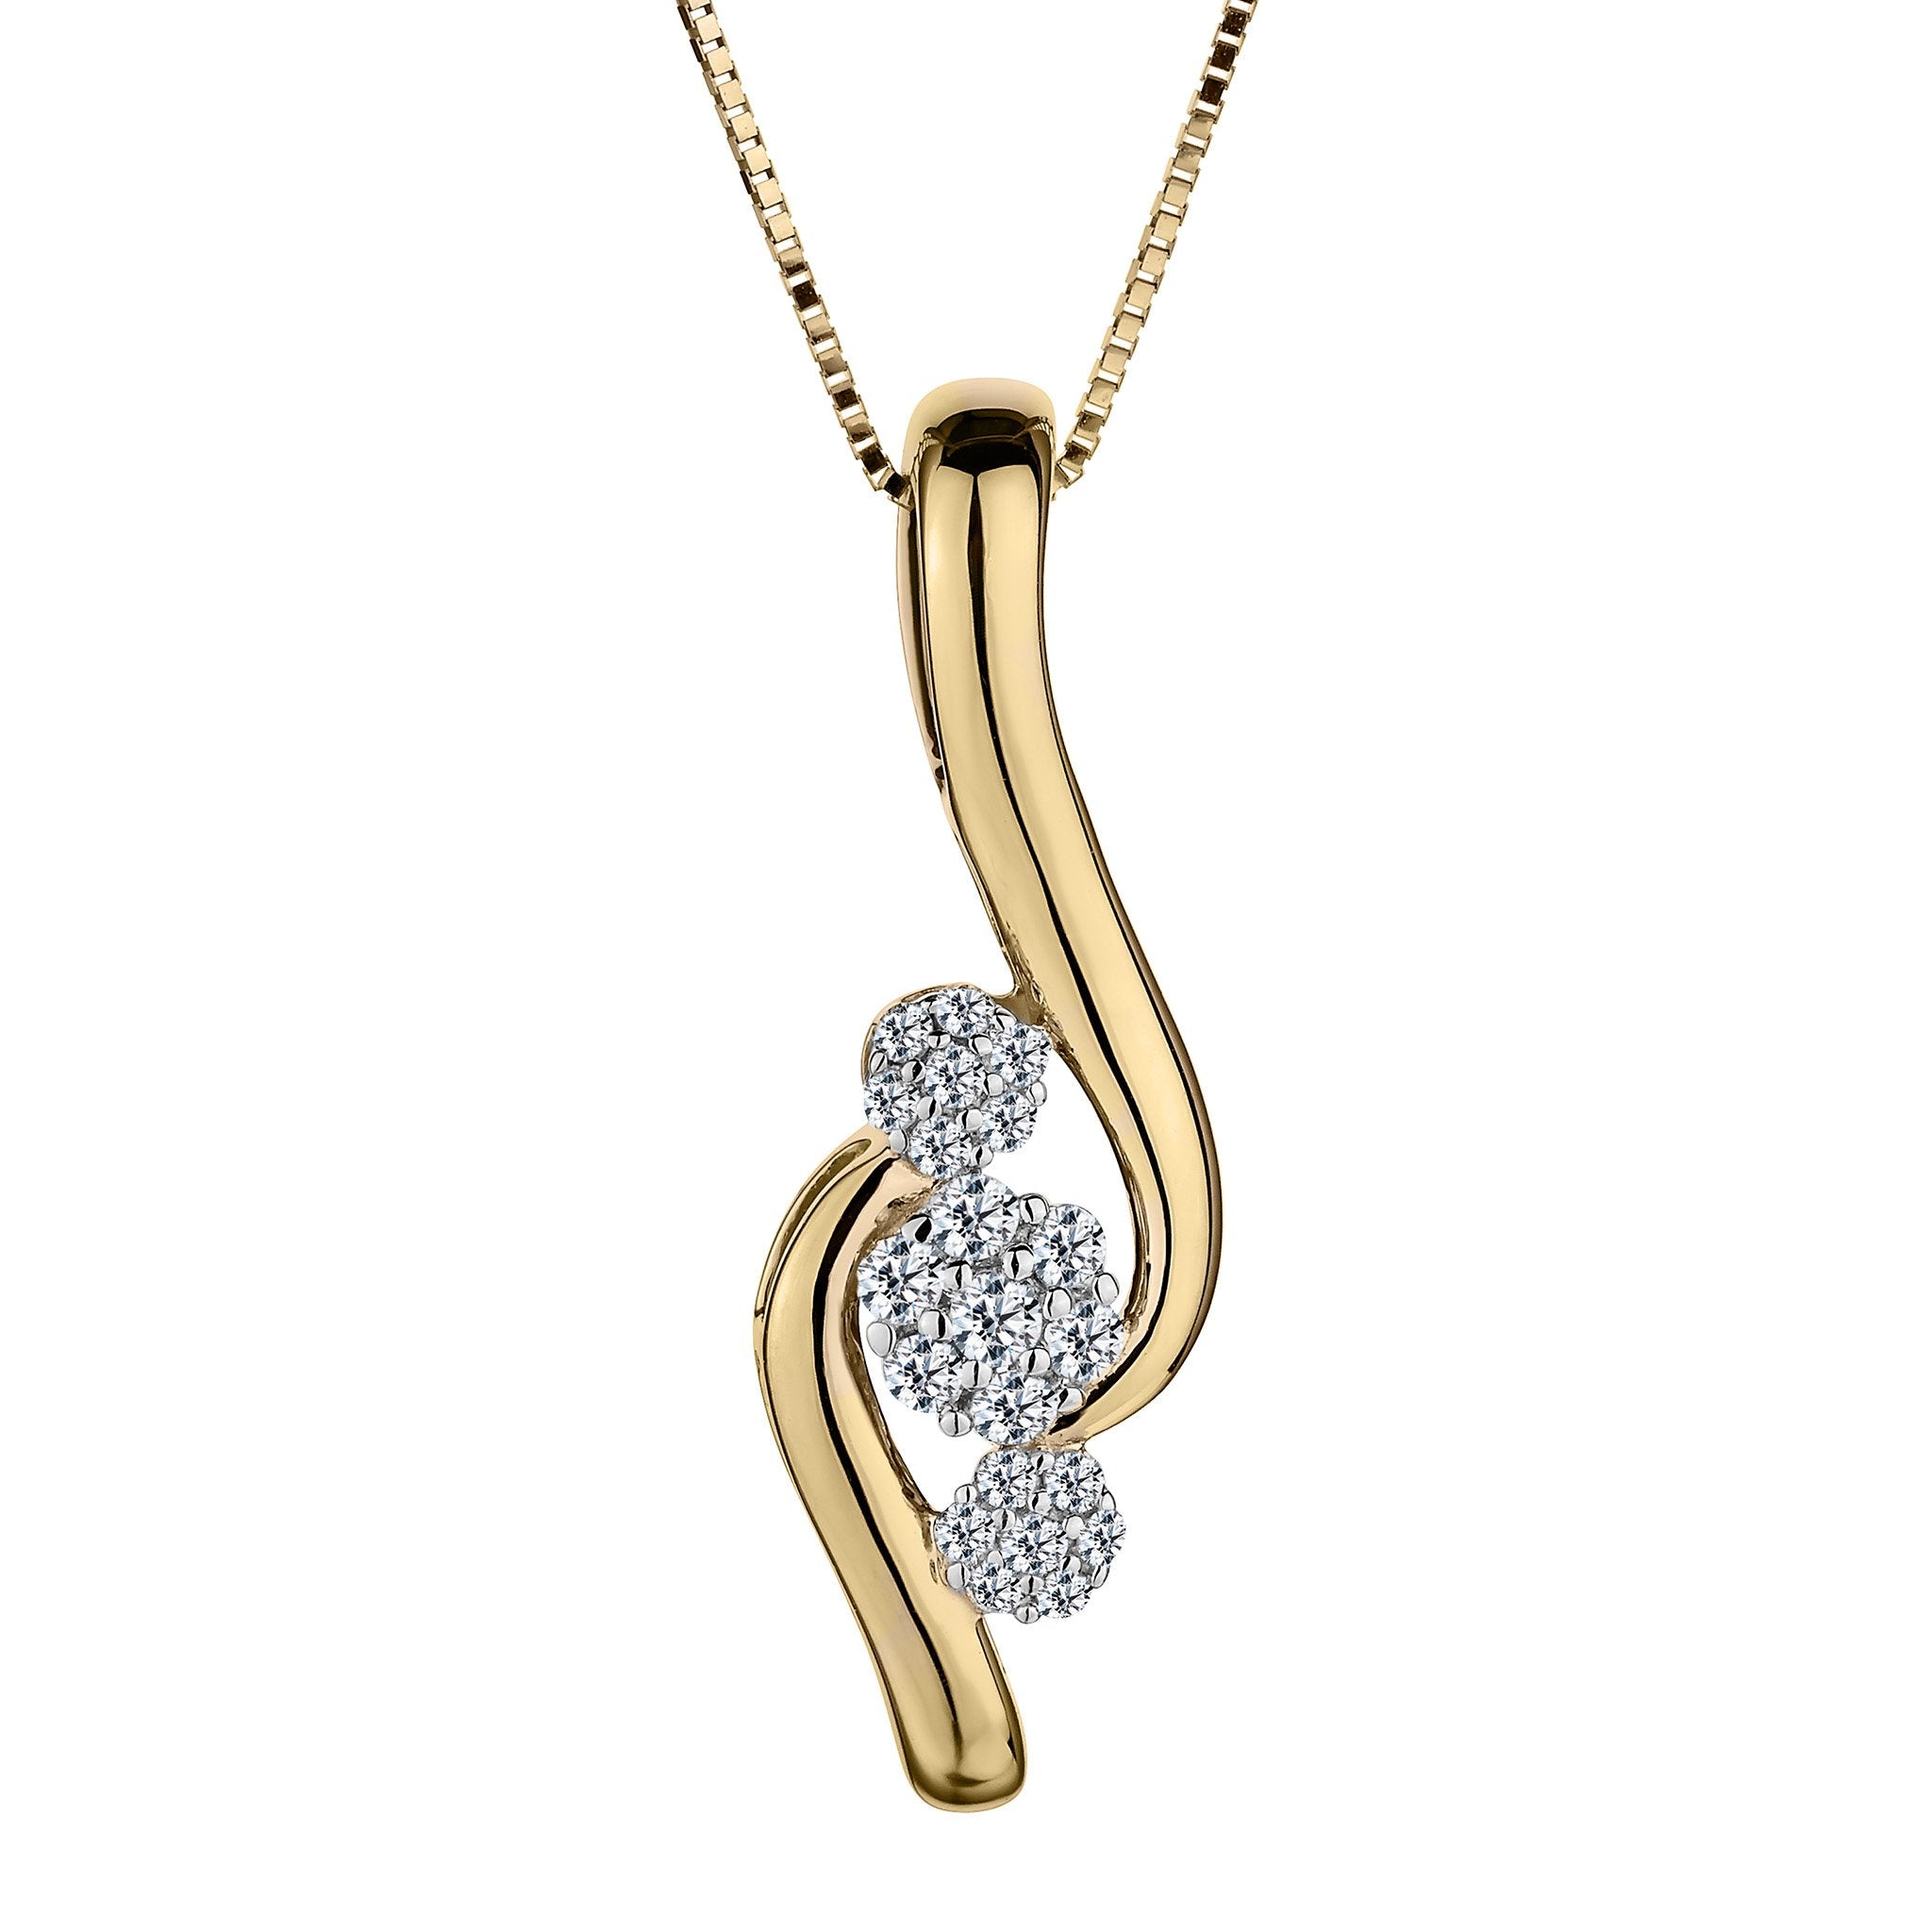 .15 Carat "Past, Present, Future" Diamond Pendant,  10kt Yellow Gold. Necklaces and Pendants. Griffin Jewellery Designs.